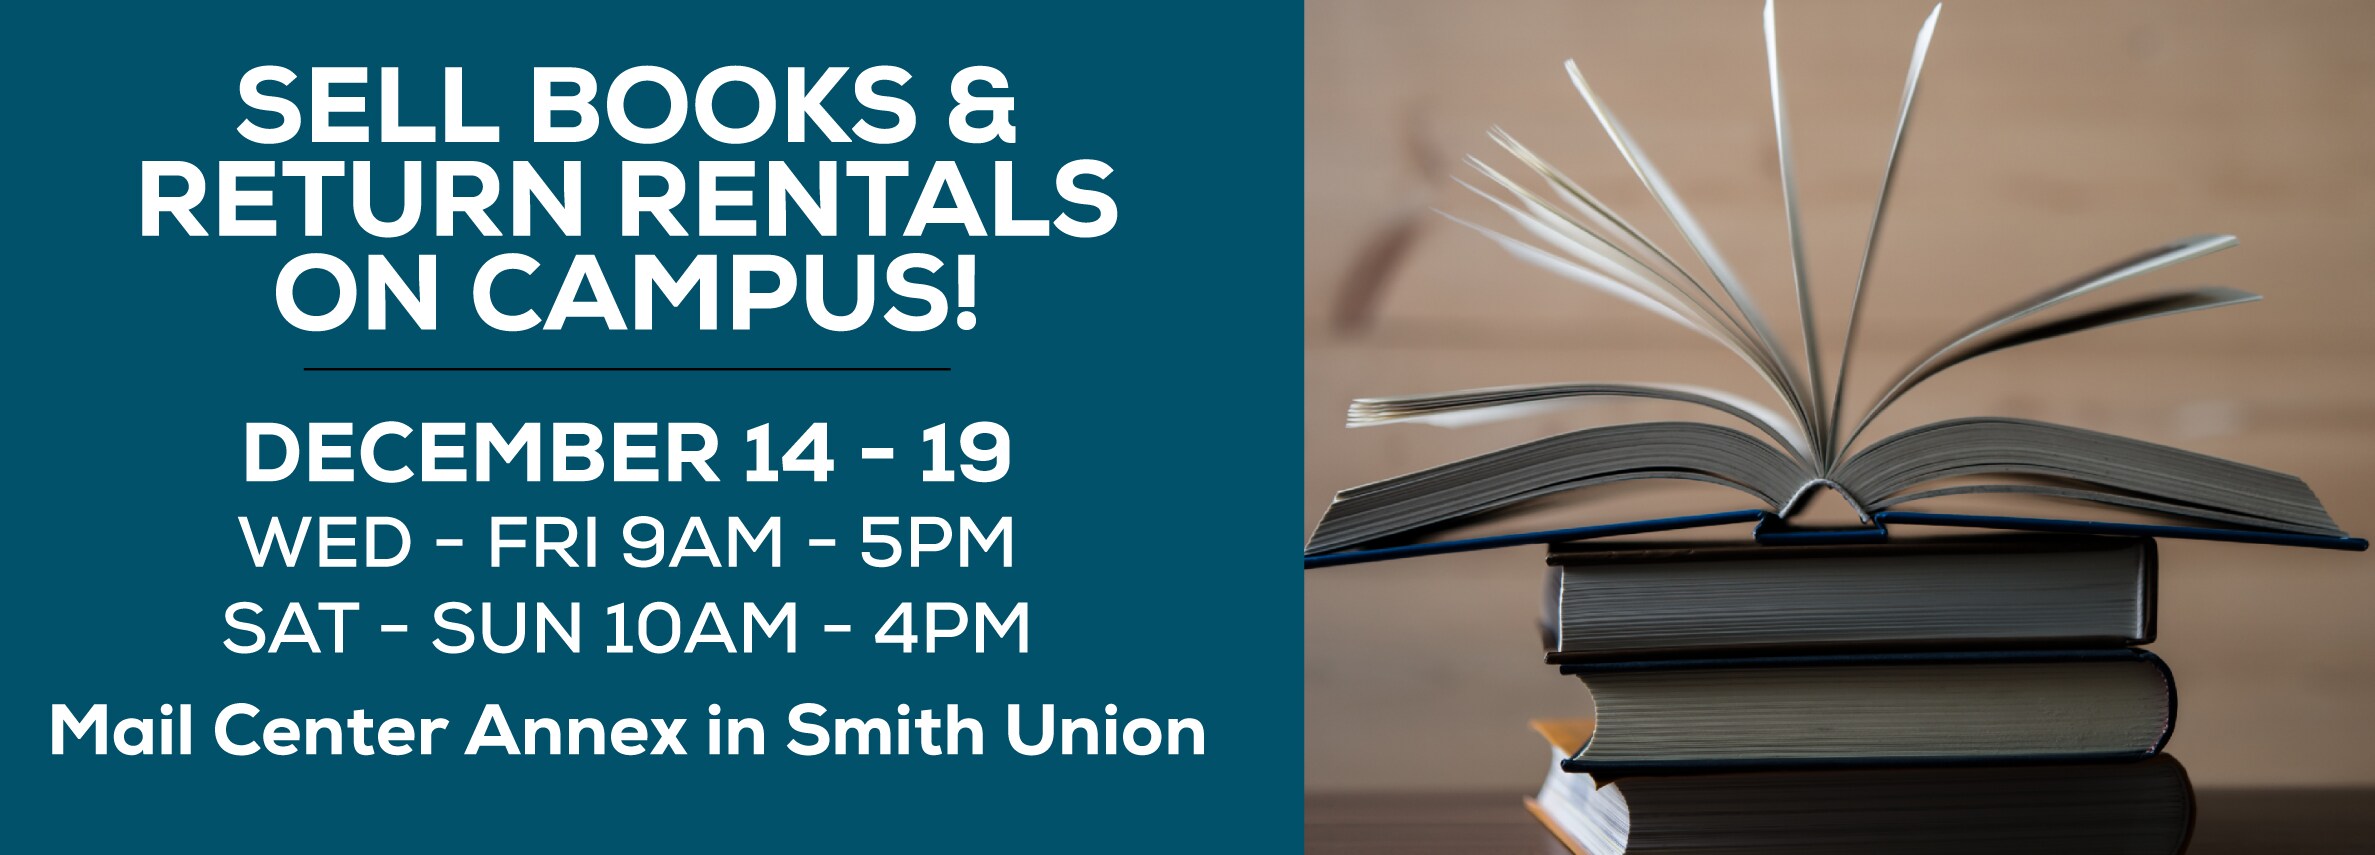 Sell books and return rentals on campus! December 14 - 19 W-F 9AM - 5PM      2:13 SAT - SUN 10AM - 4PM Mail Center Annex in Smith Union